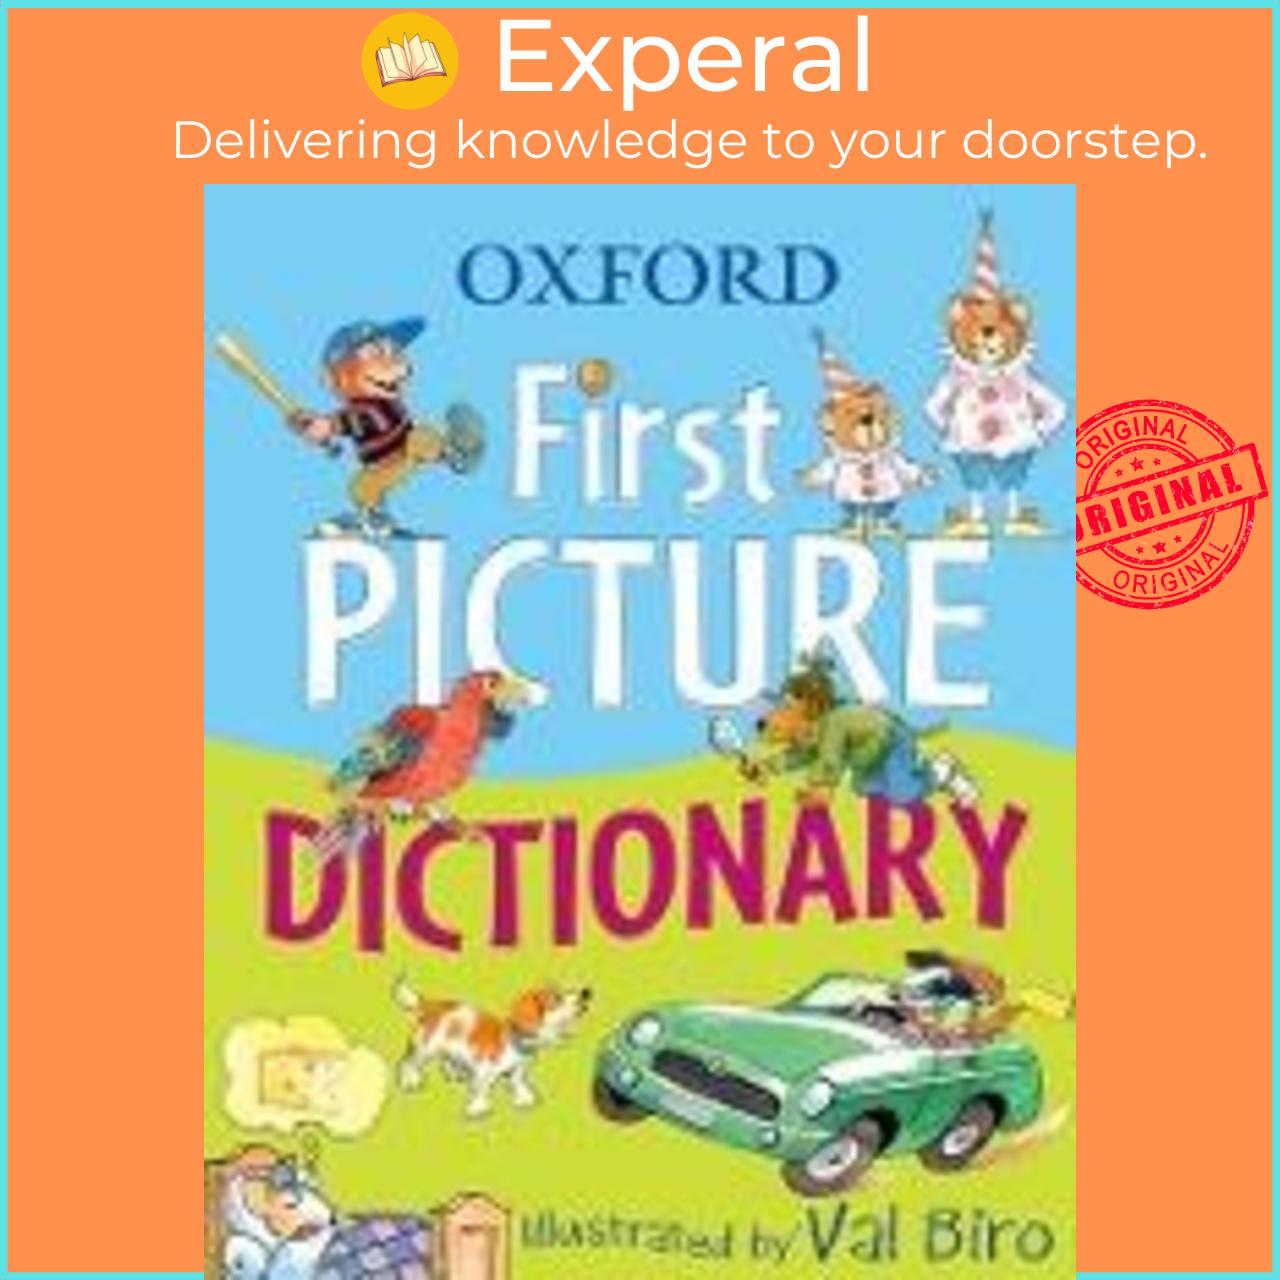 Sách - Oxford First Picture Dictionary by Oxford Dictionaries (UK edition, paperback)